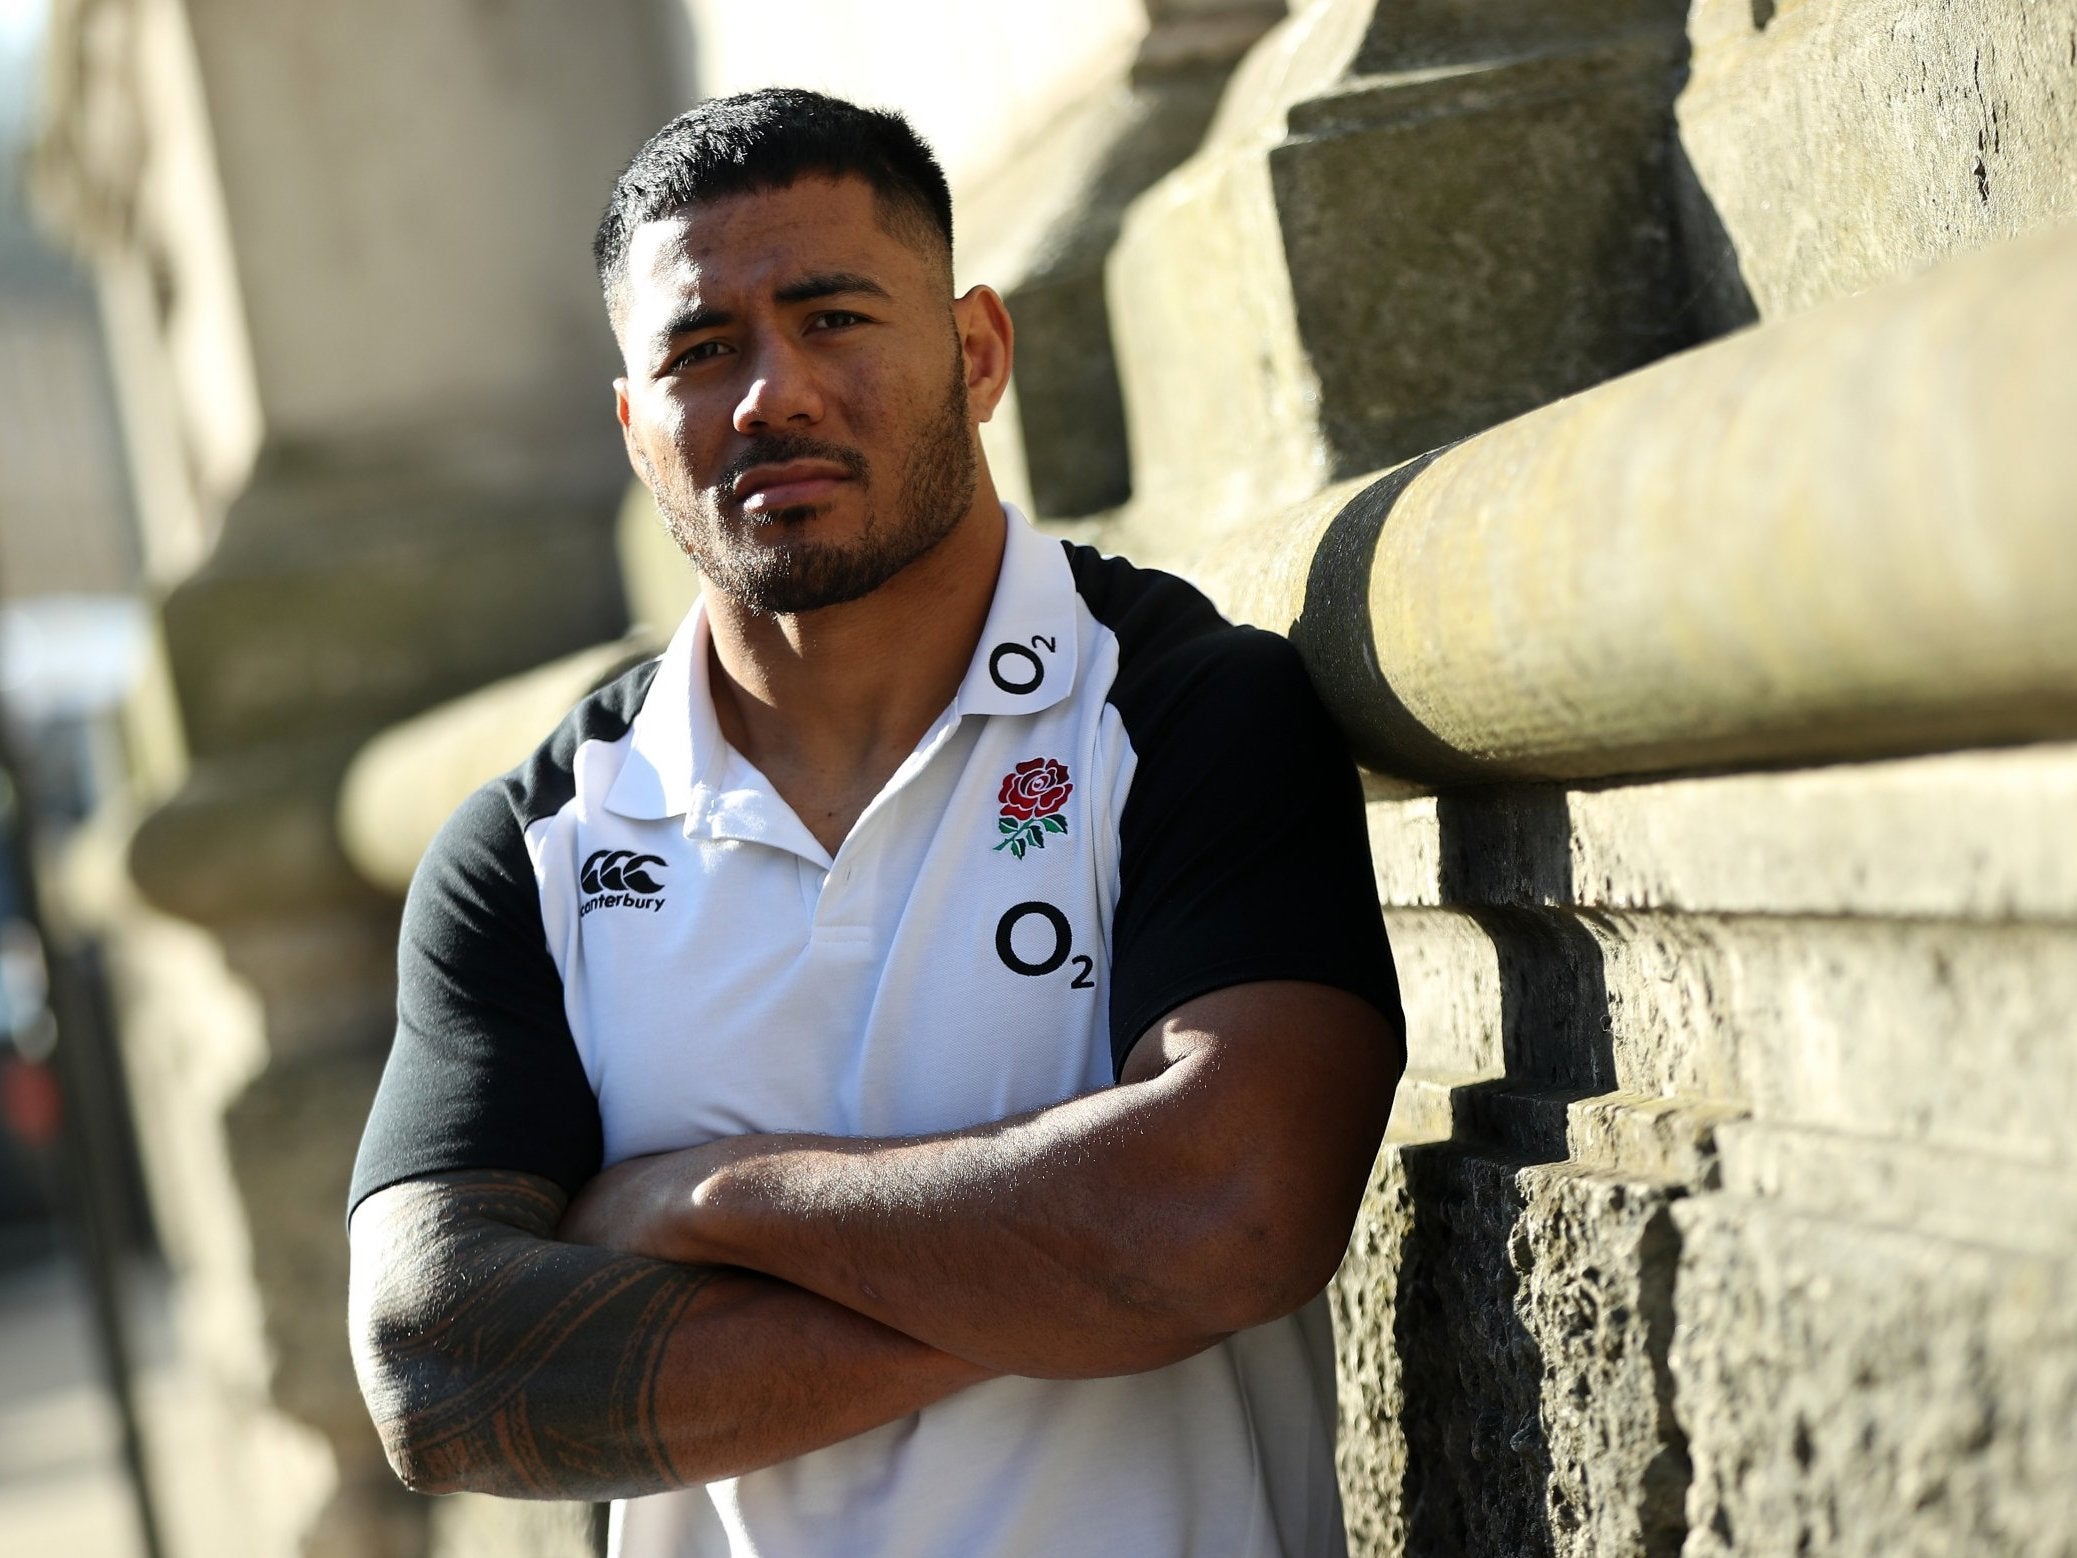 Manu Tuilagi is weighing up a move to Racing 92 that would end his England career